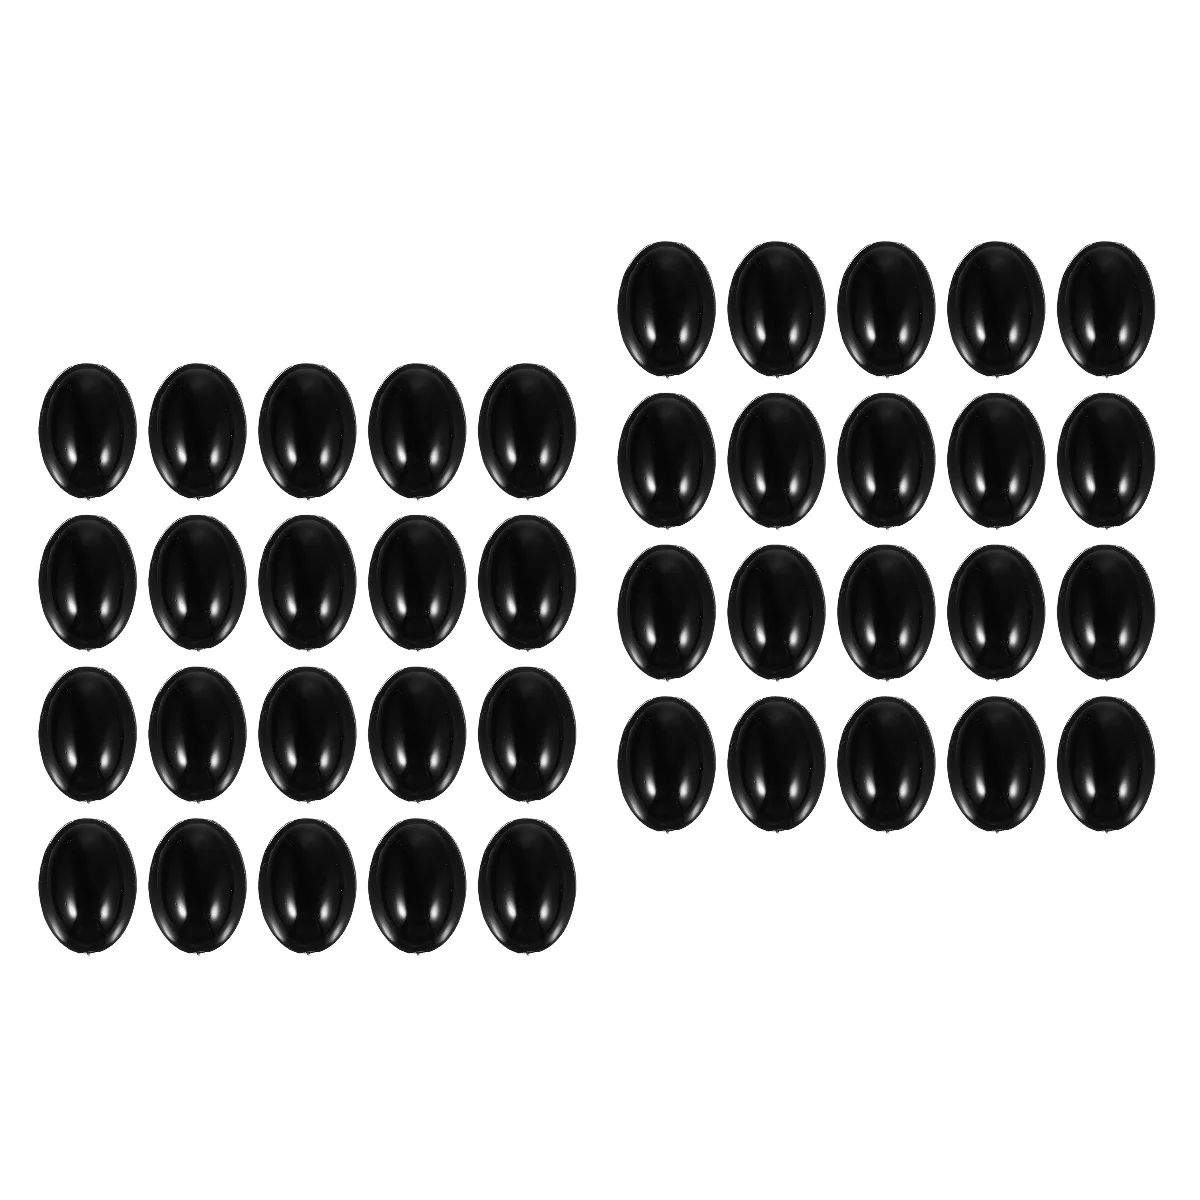 

200 Pcs Toy Nose DIY Materials Decor Decorate Plastic Oval Eyes Accessories Craft Noses Black Baby